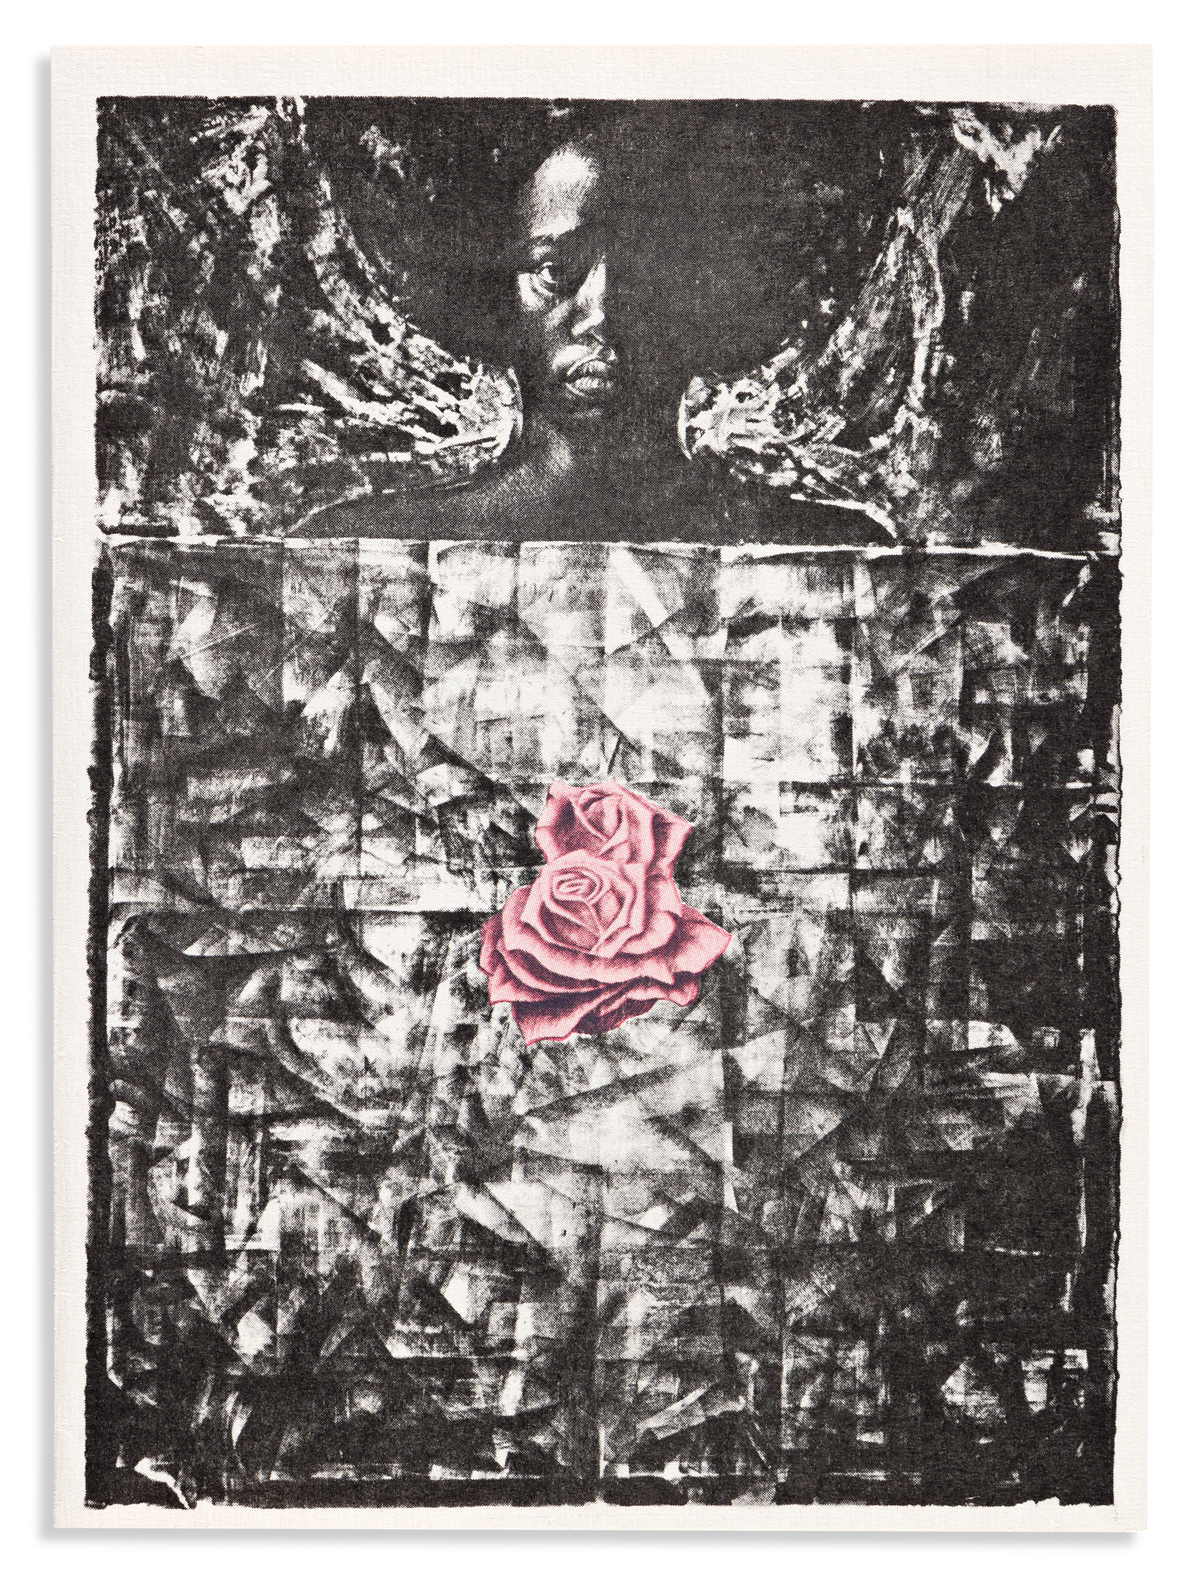 (ART.) Charles White. Reproduction of his Love Letter 1 on a card calling for the release of Angela Davis.